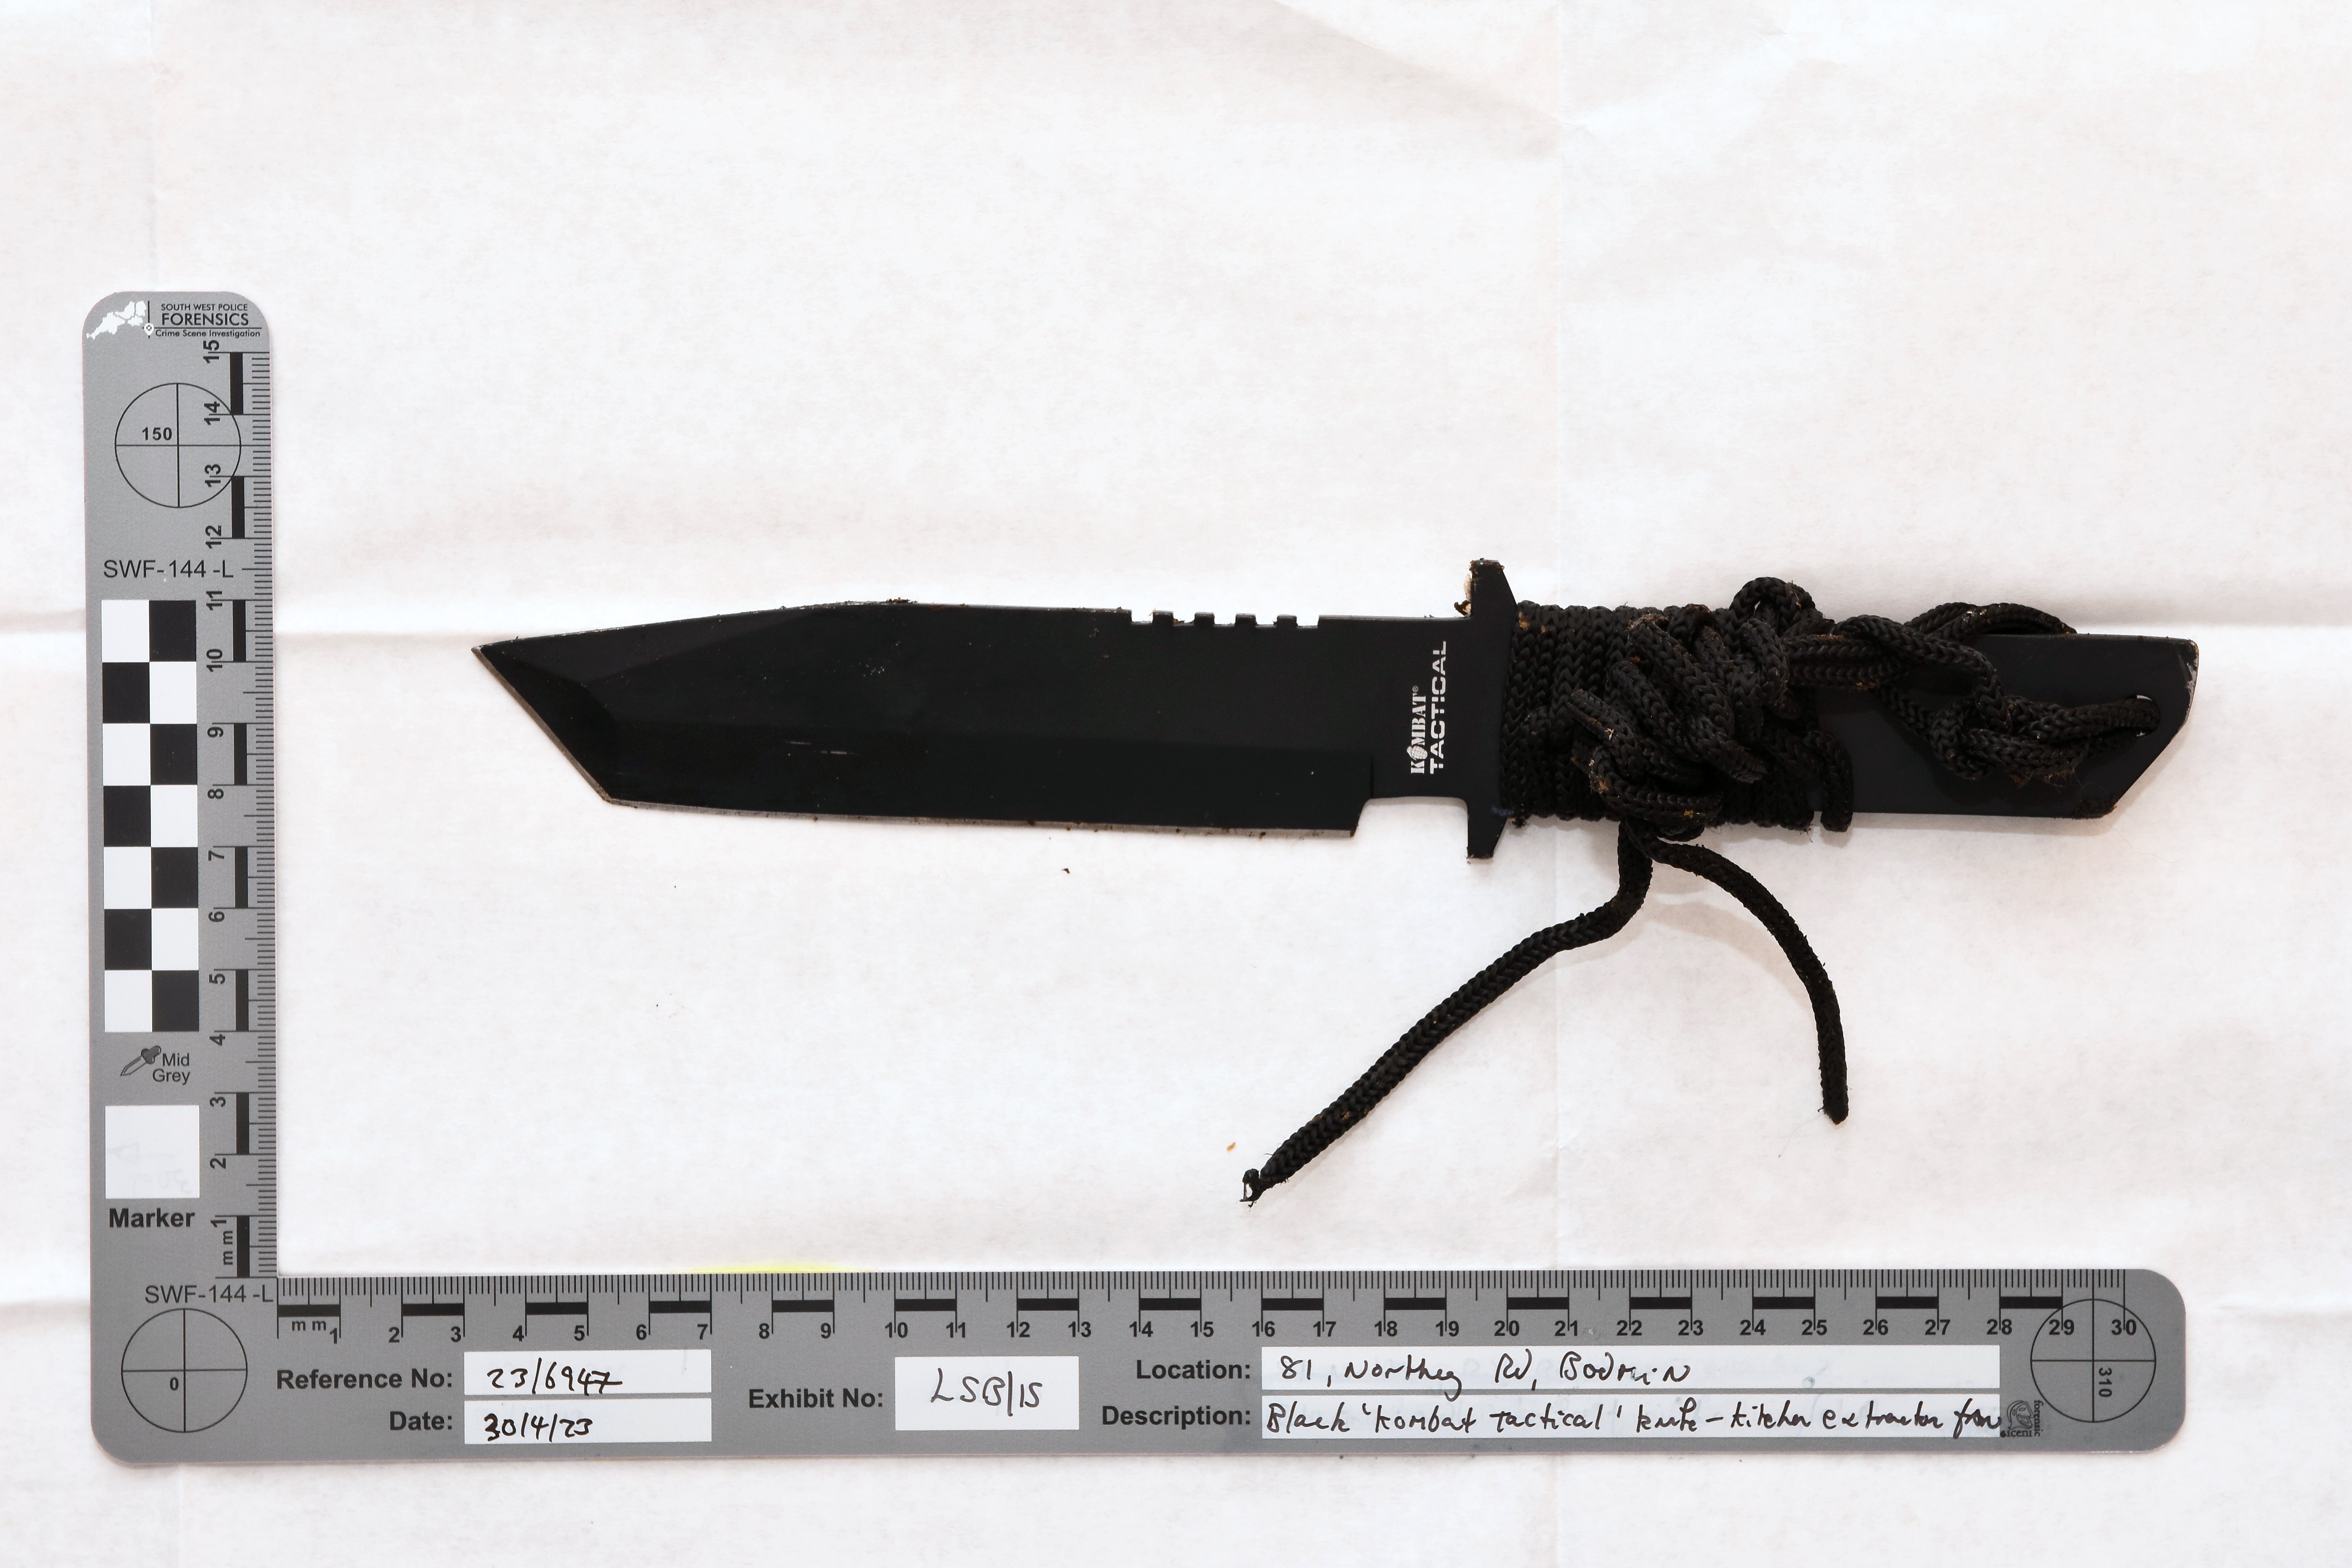 Serrated hunting knife thought to have been used by Hill in murder